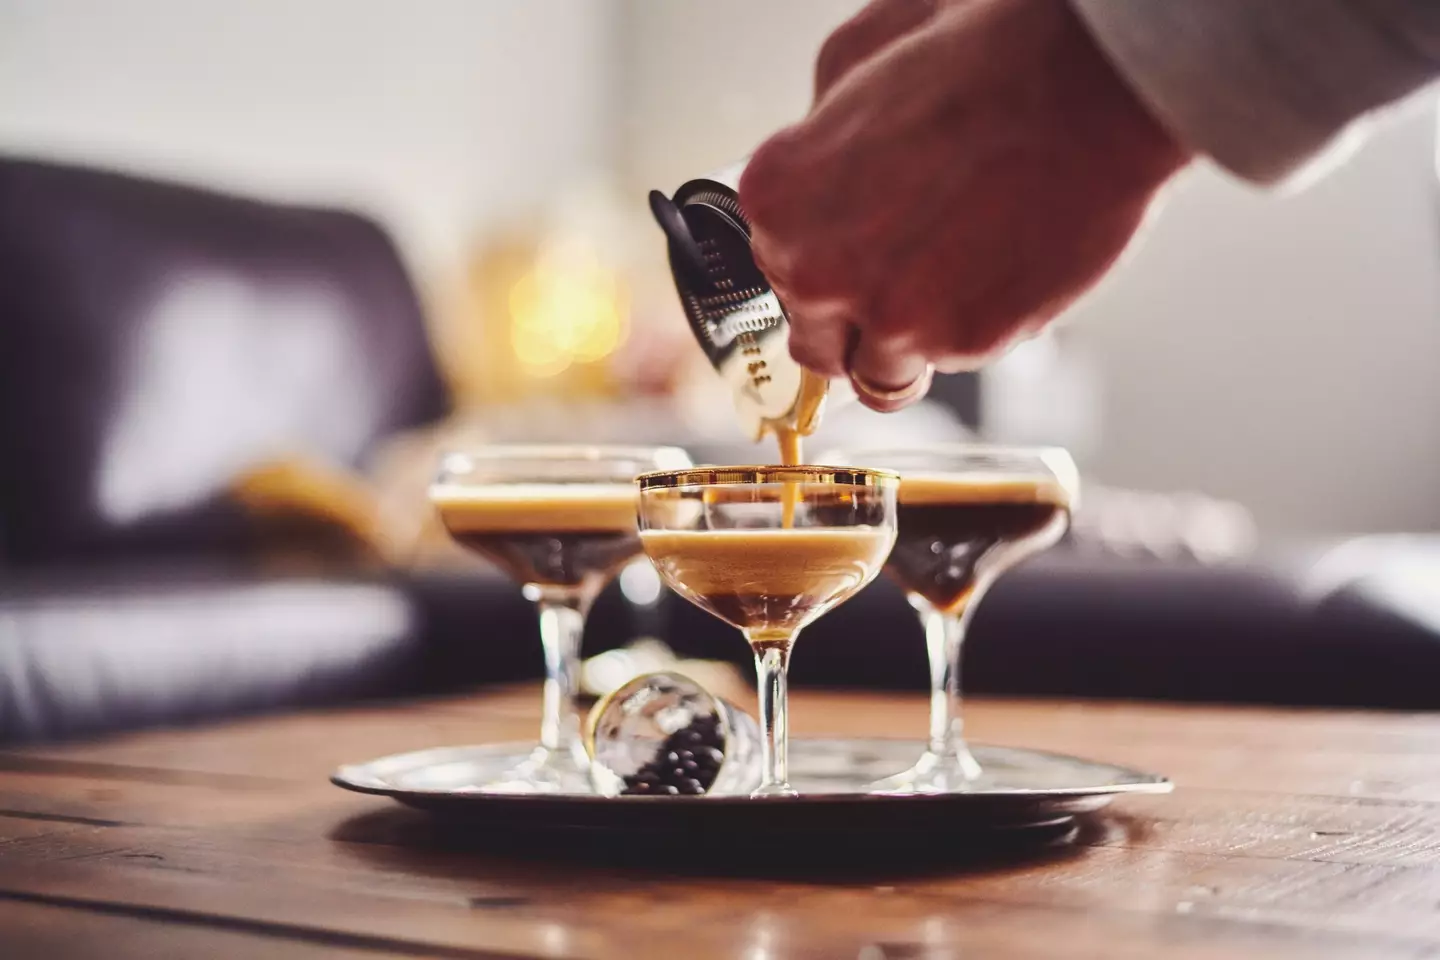 You'll be baffled by this bizarre suggestion on how to drink an espresso martini.